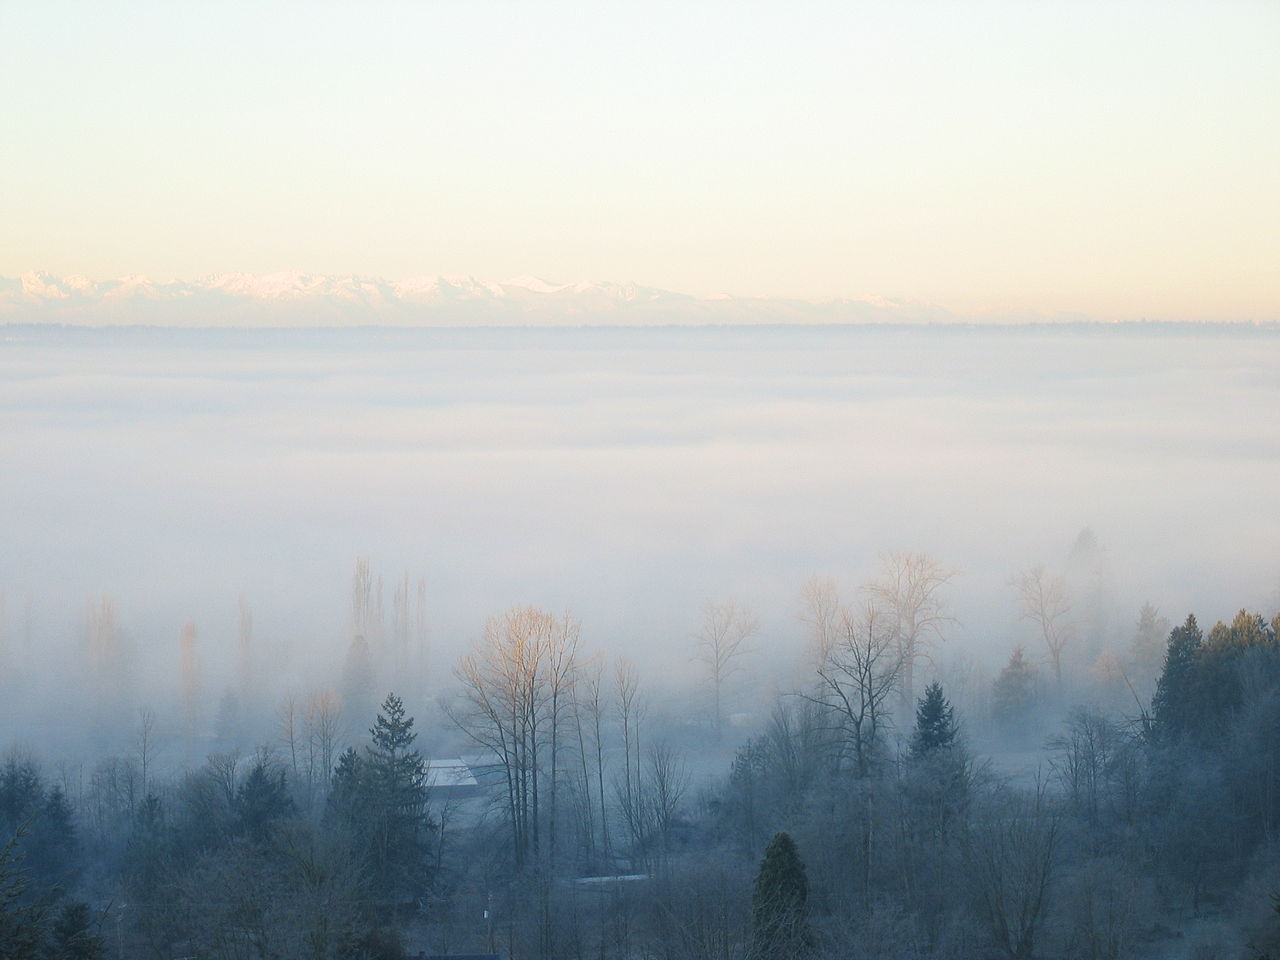 fog covers a rural area